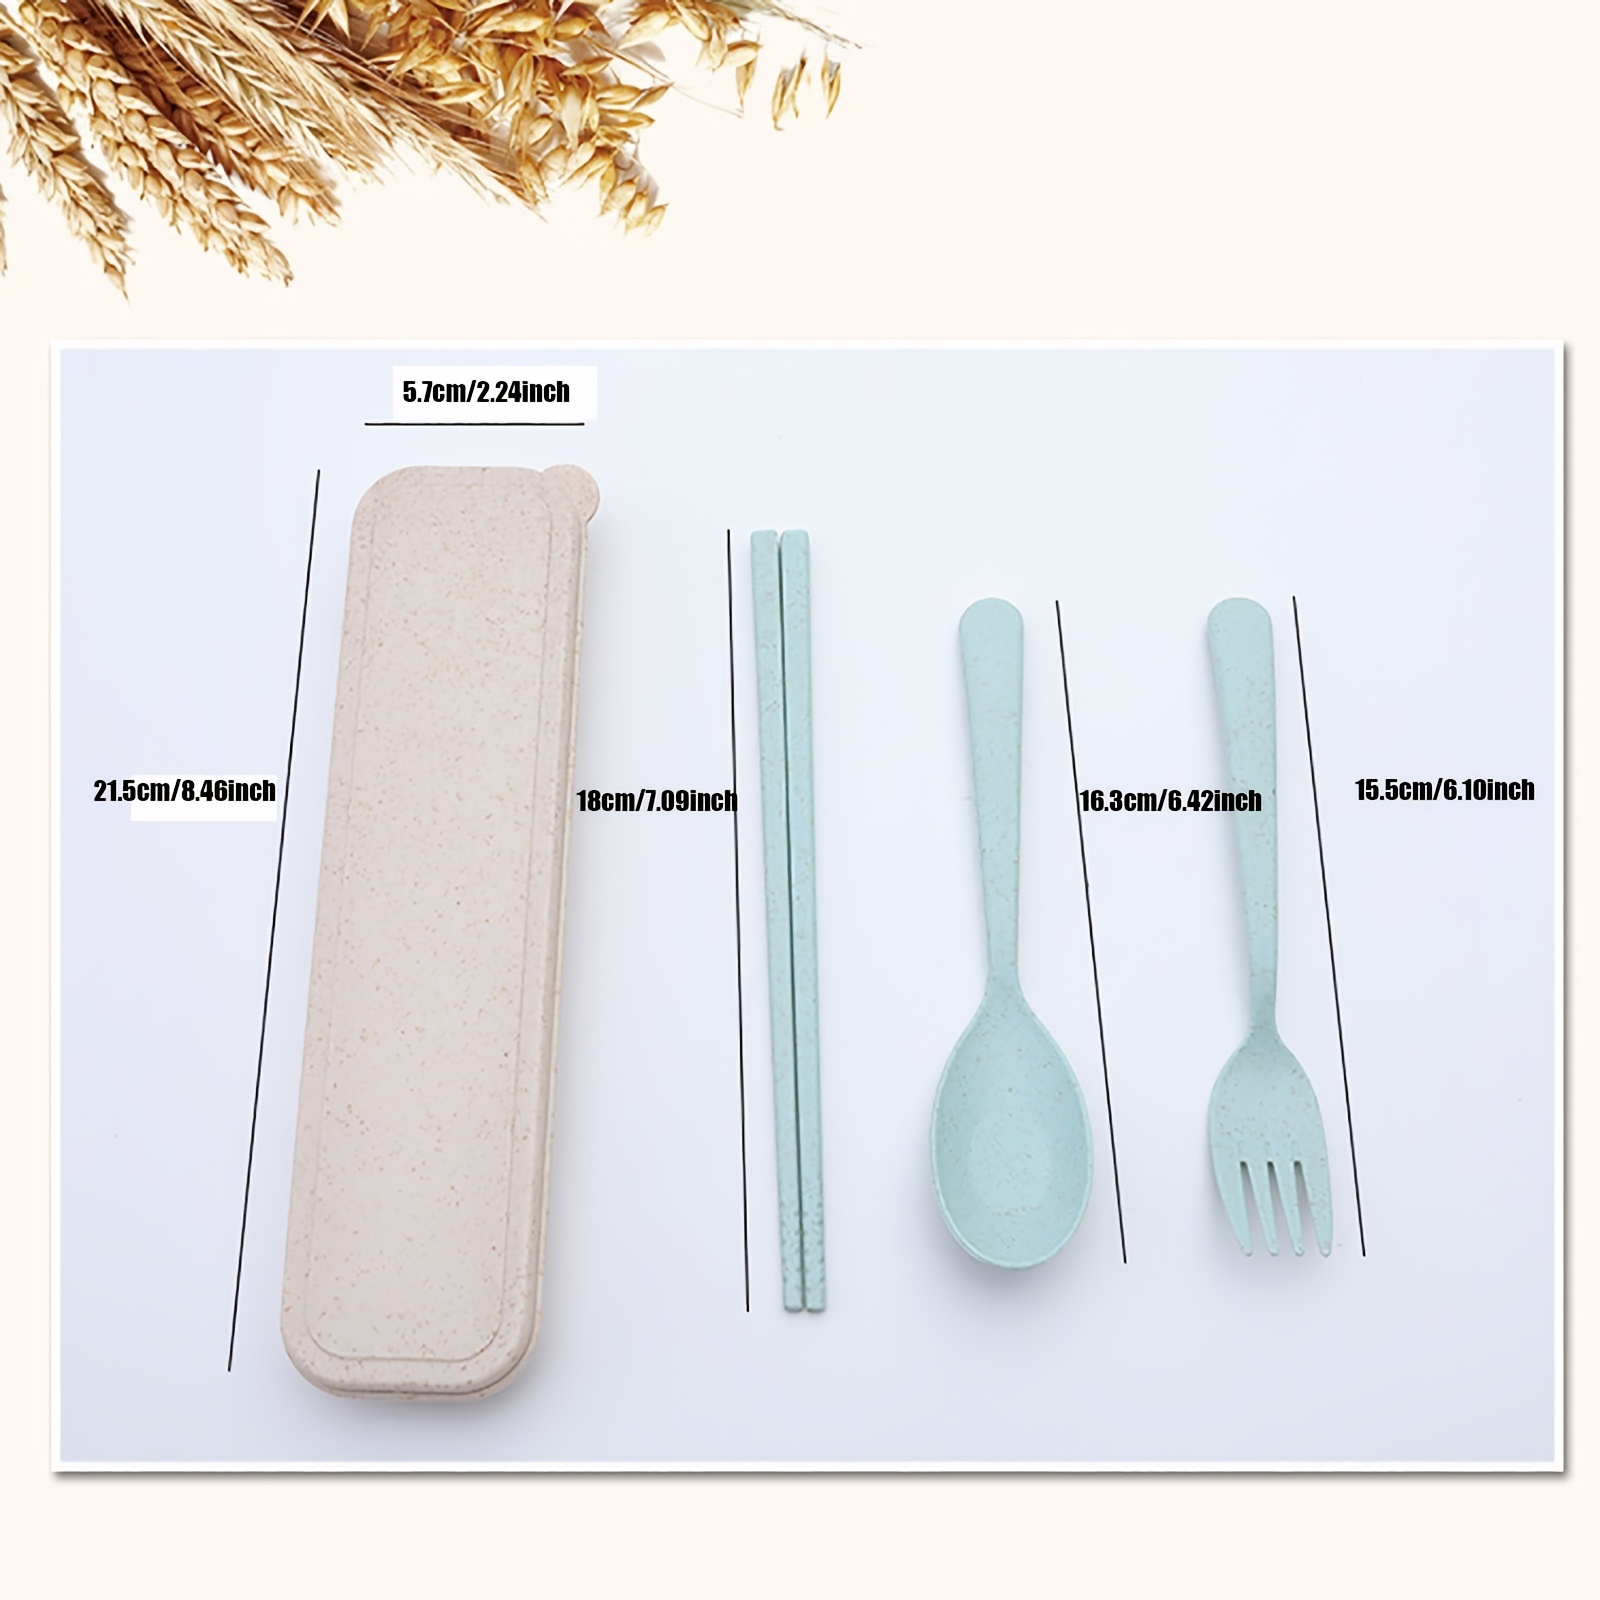 Reusable Travel Utensils Set with Case, 2 Sets Wheat Straw